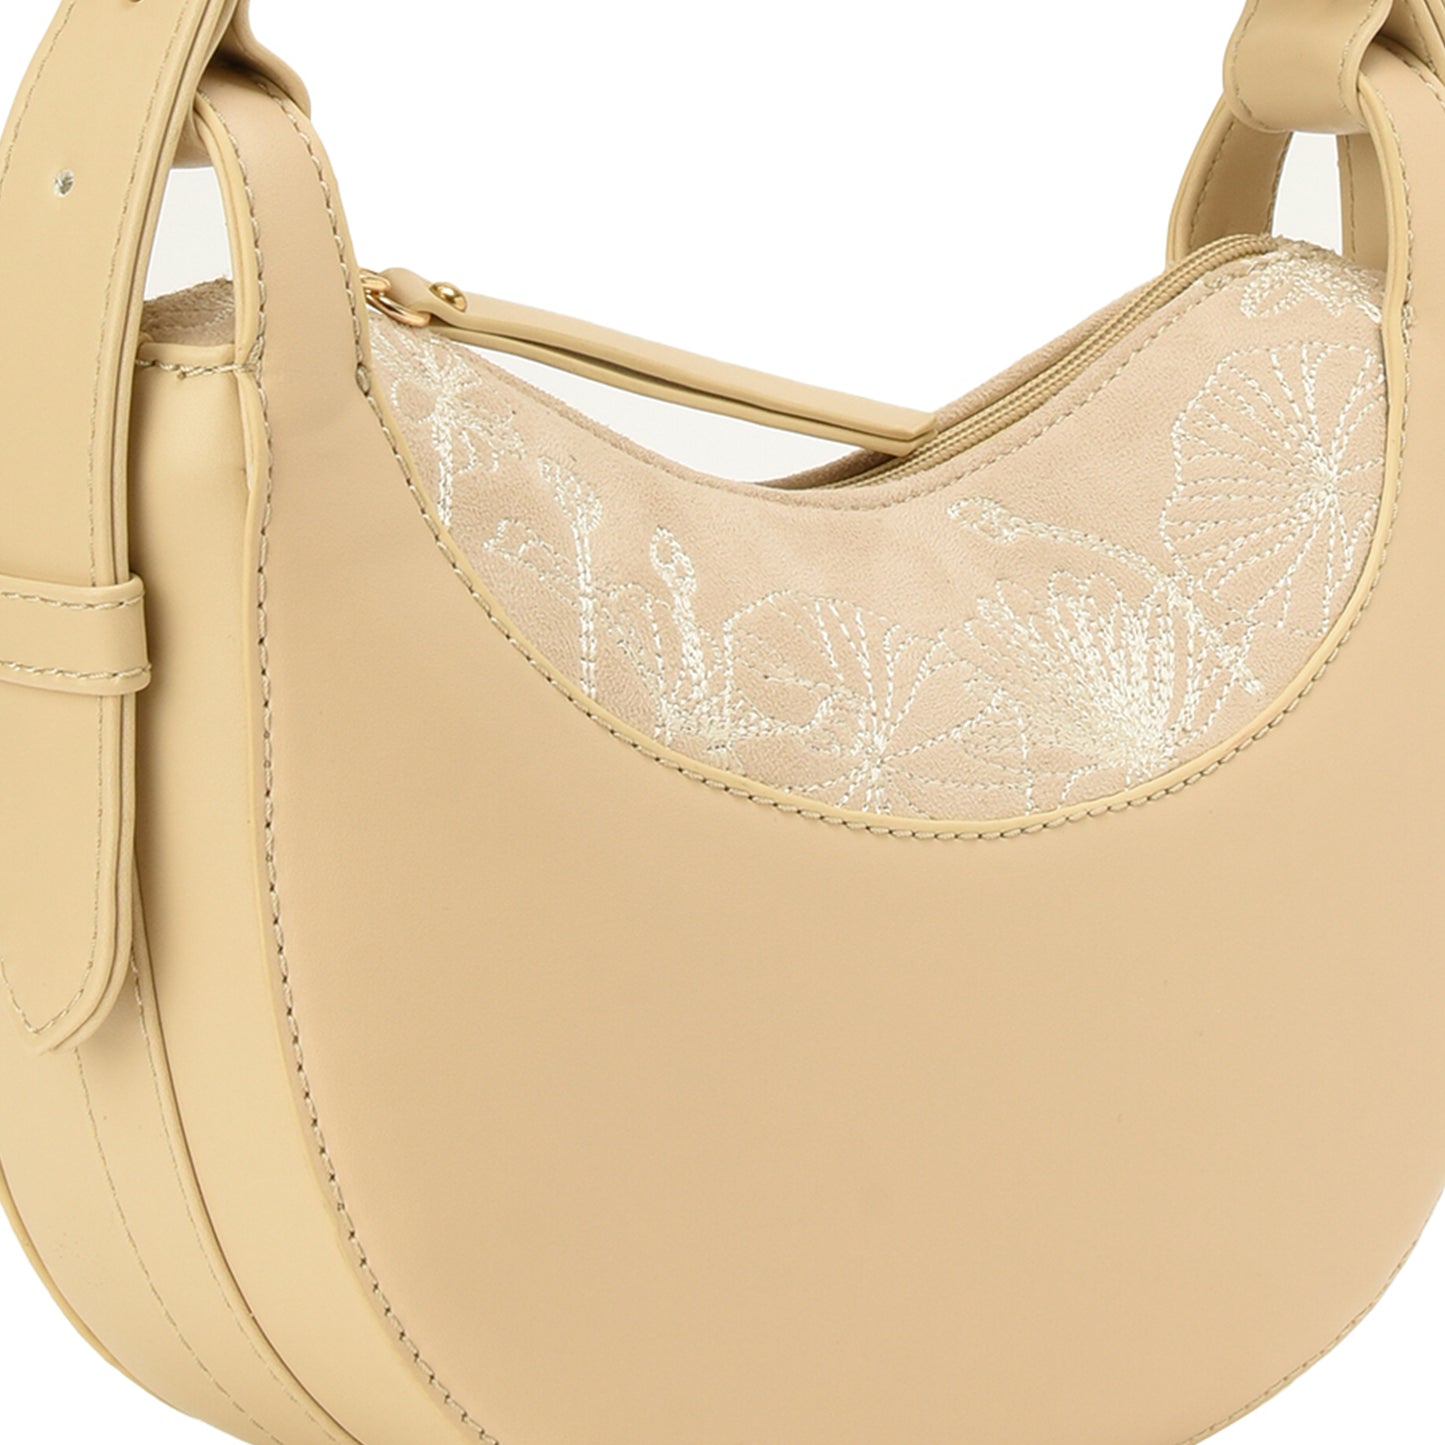 Handbag Beige with embroidery